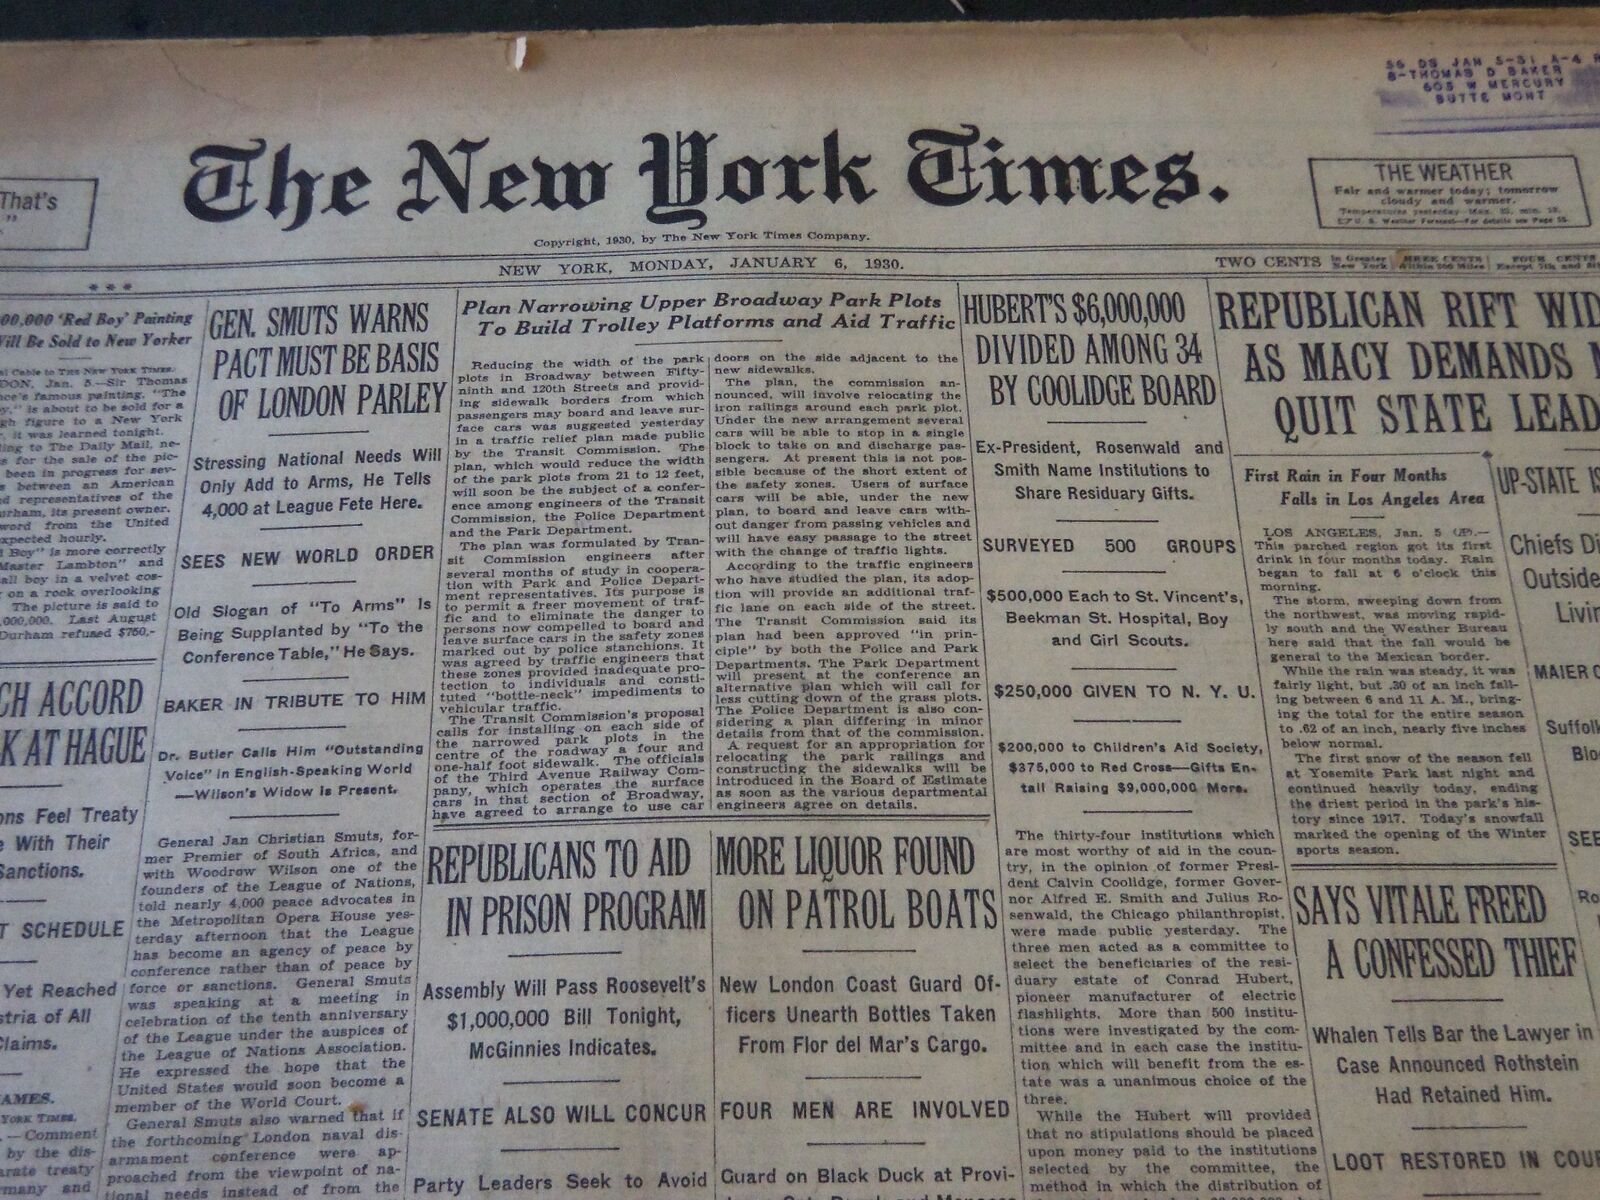 1930 JANUARY 6 NEW YORK TIMES - HUBERT\'S $6,000,000 DIVIDEND AMONG 3Y - NT 5700